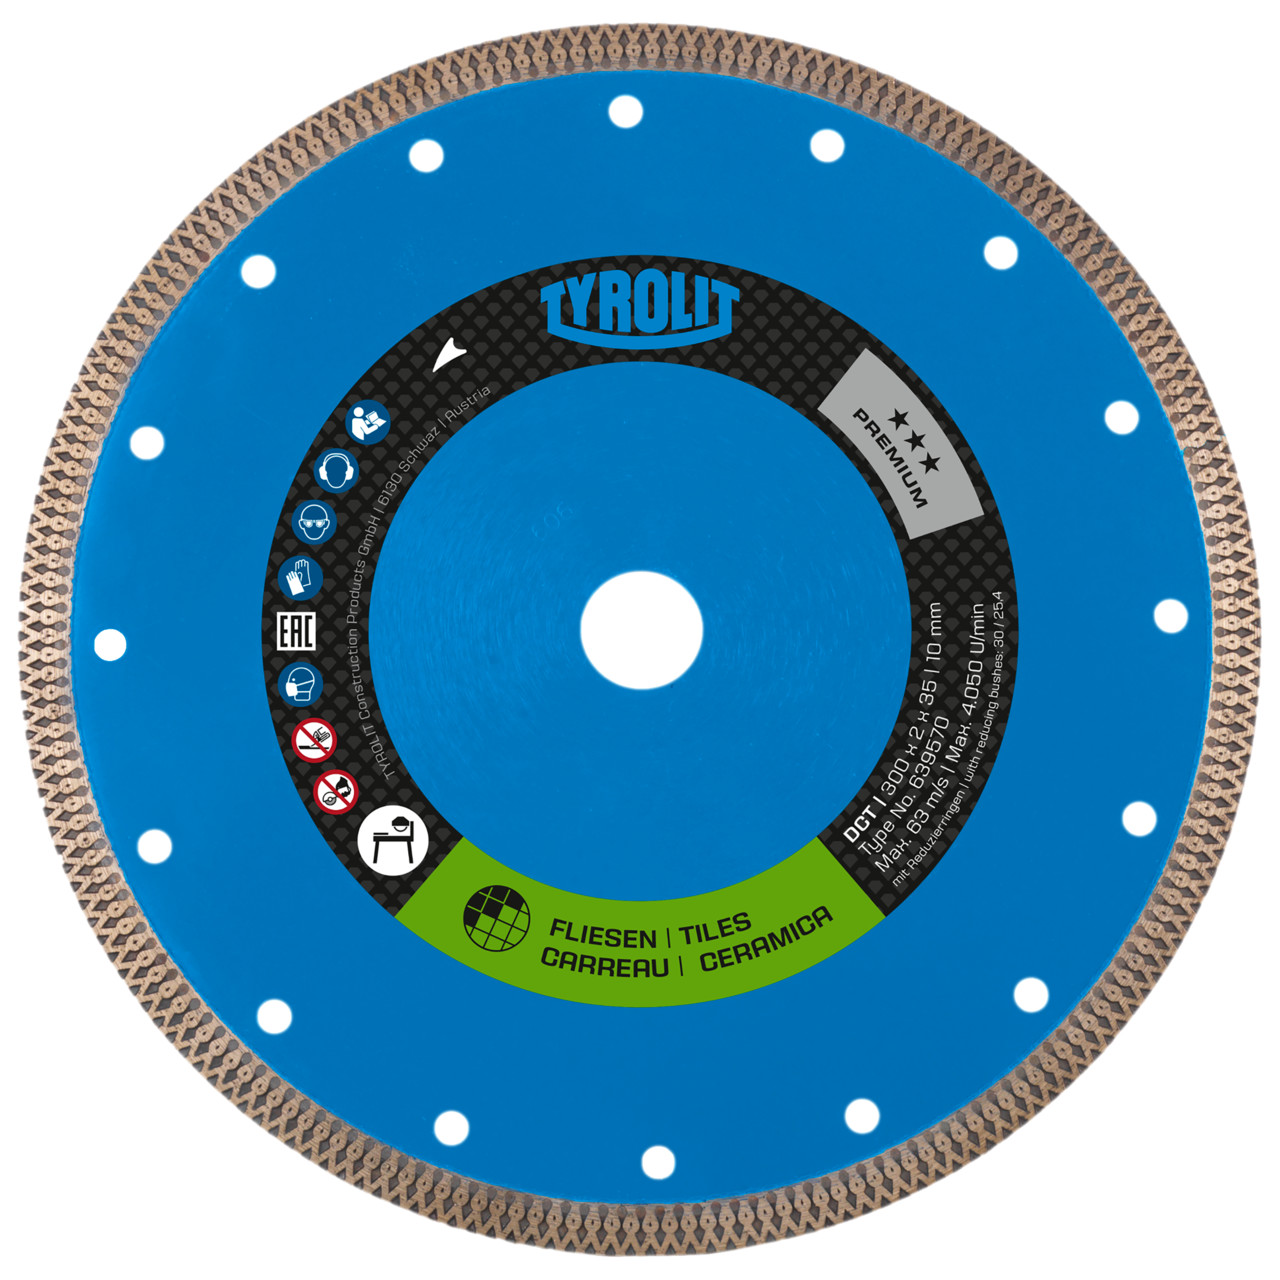 TYROLIT table saw blade DxDxH 350x2.4x35 DCT, shape: 1A1R (cut-off wheel with continuous cutting wheel), Art. 639571